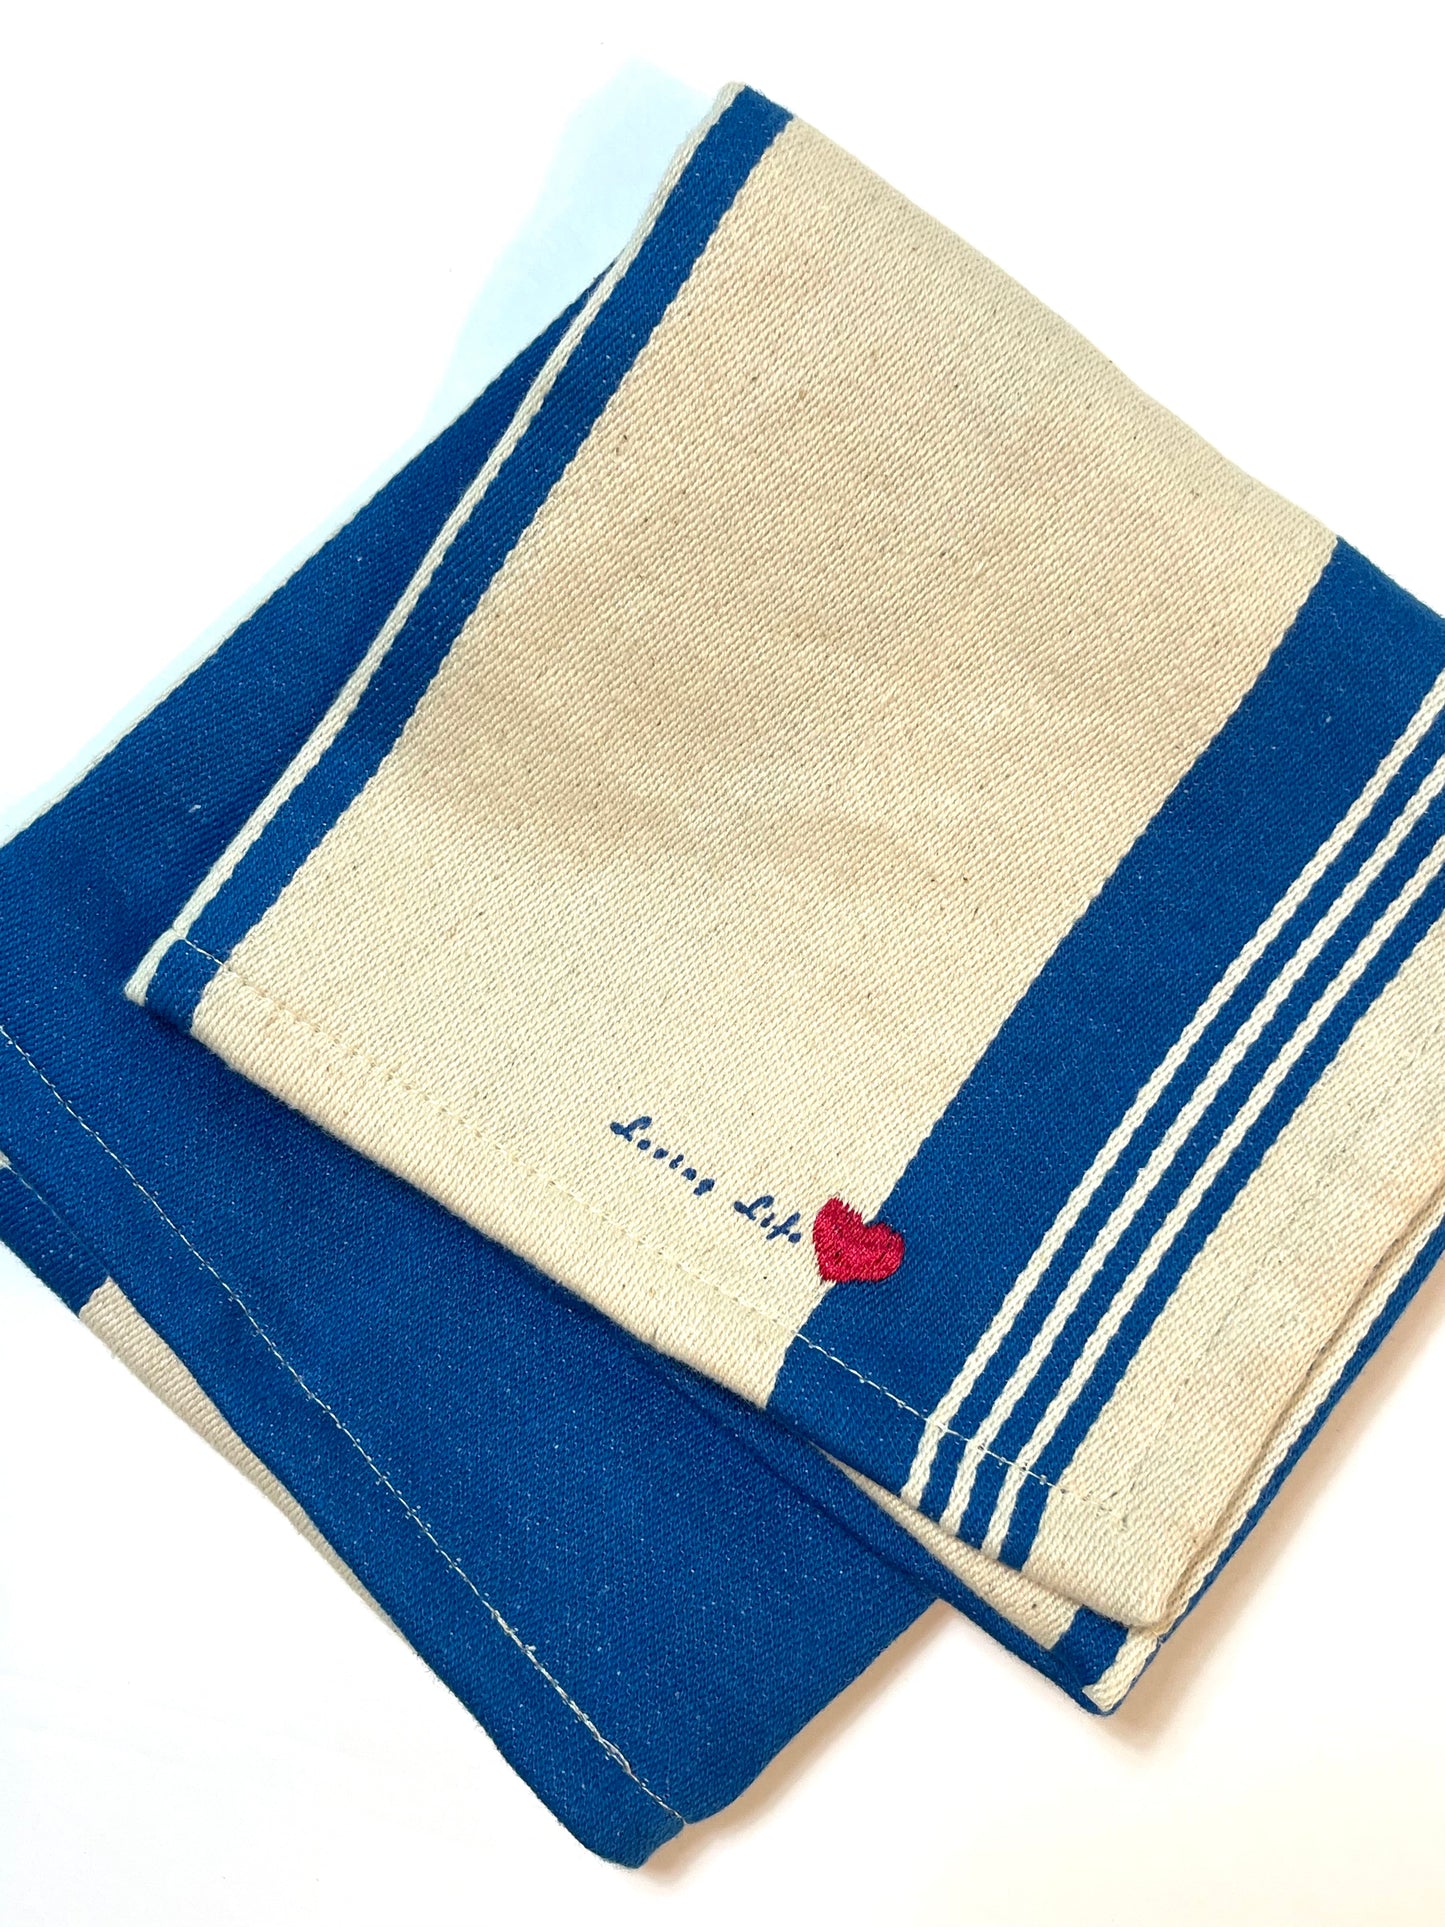 "Loving Life" Woven Placemat (Set of 4)